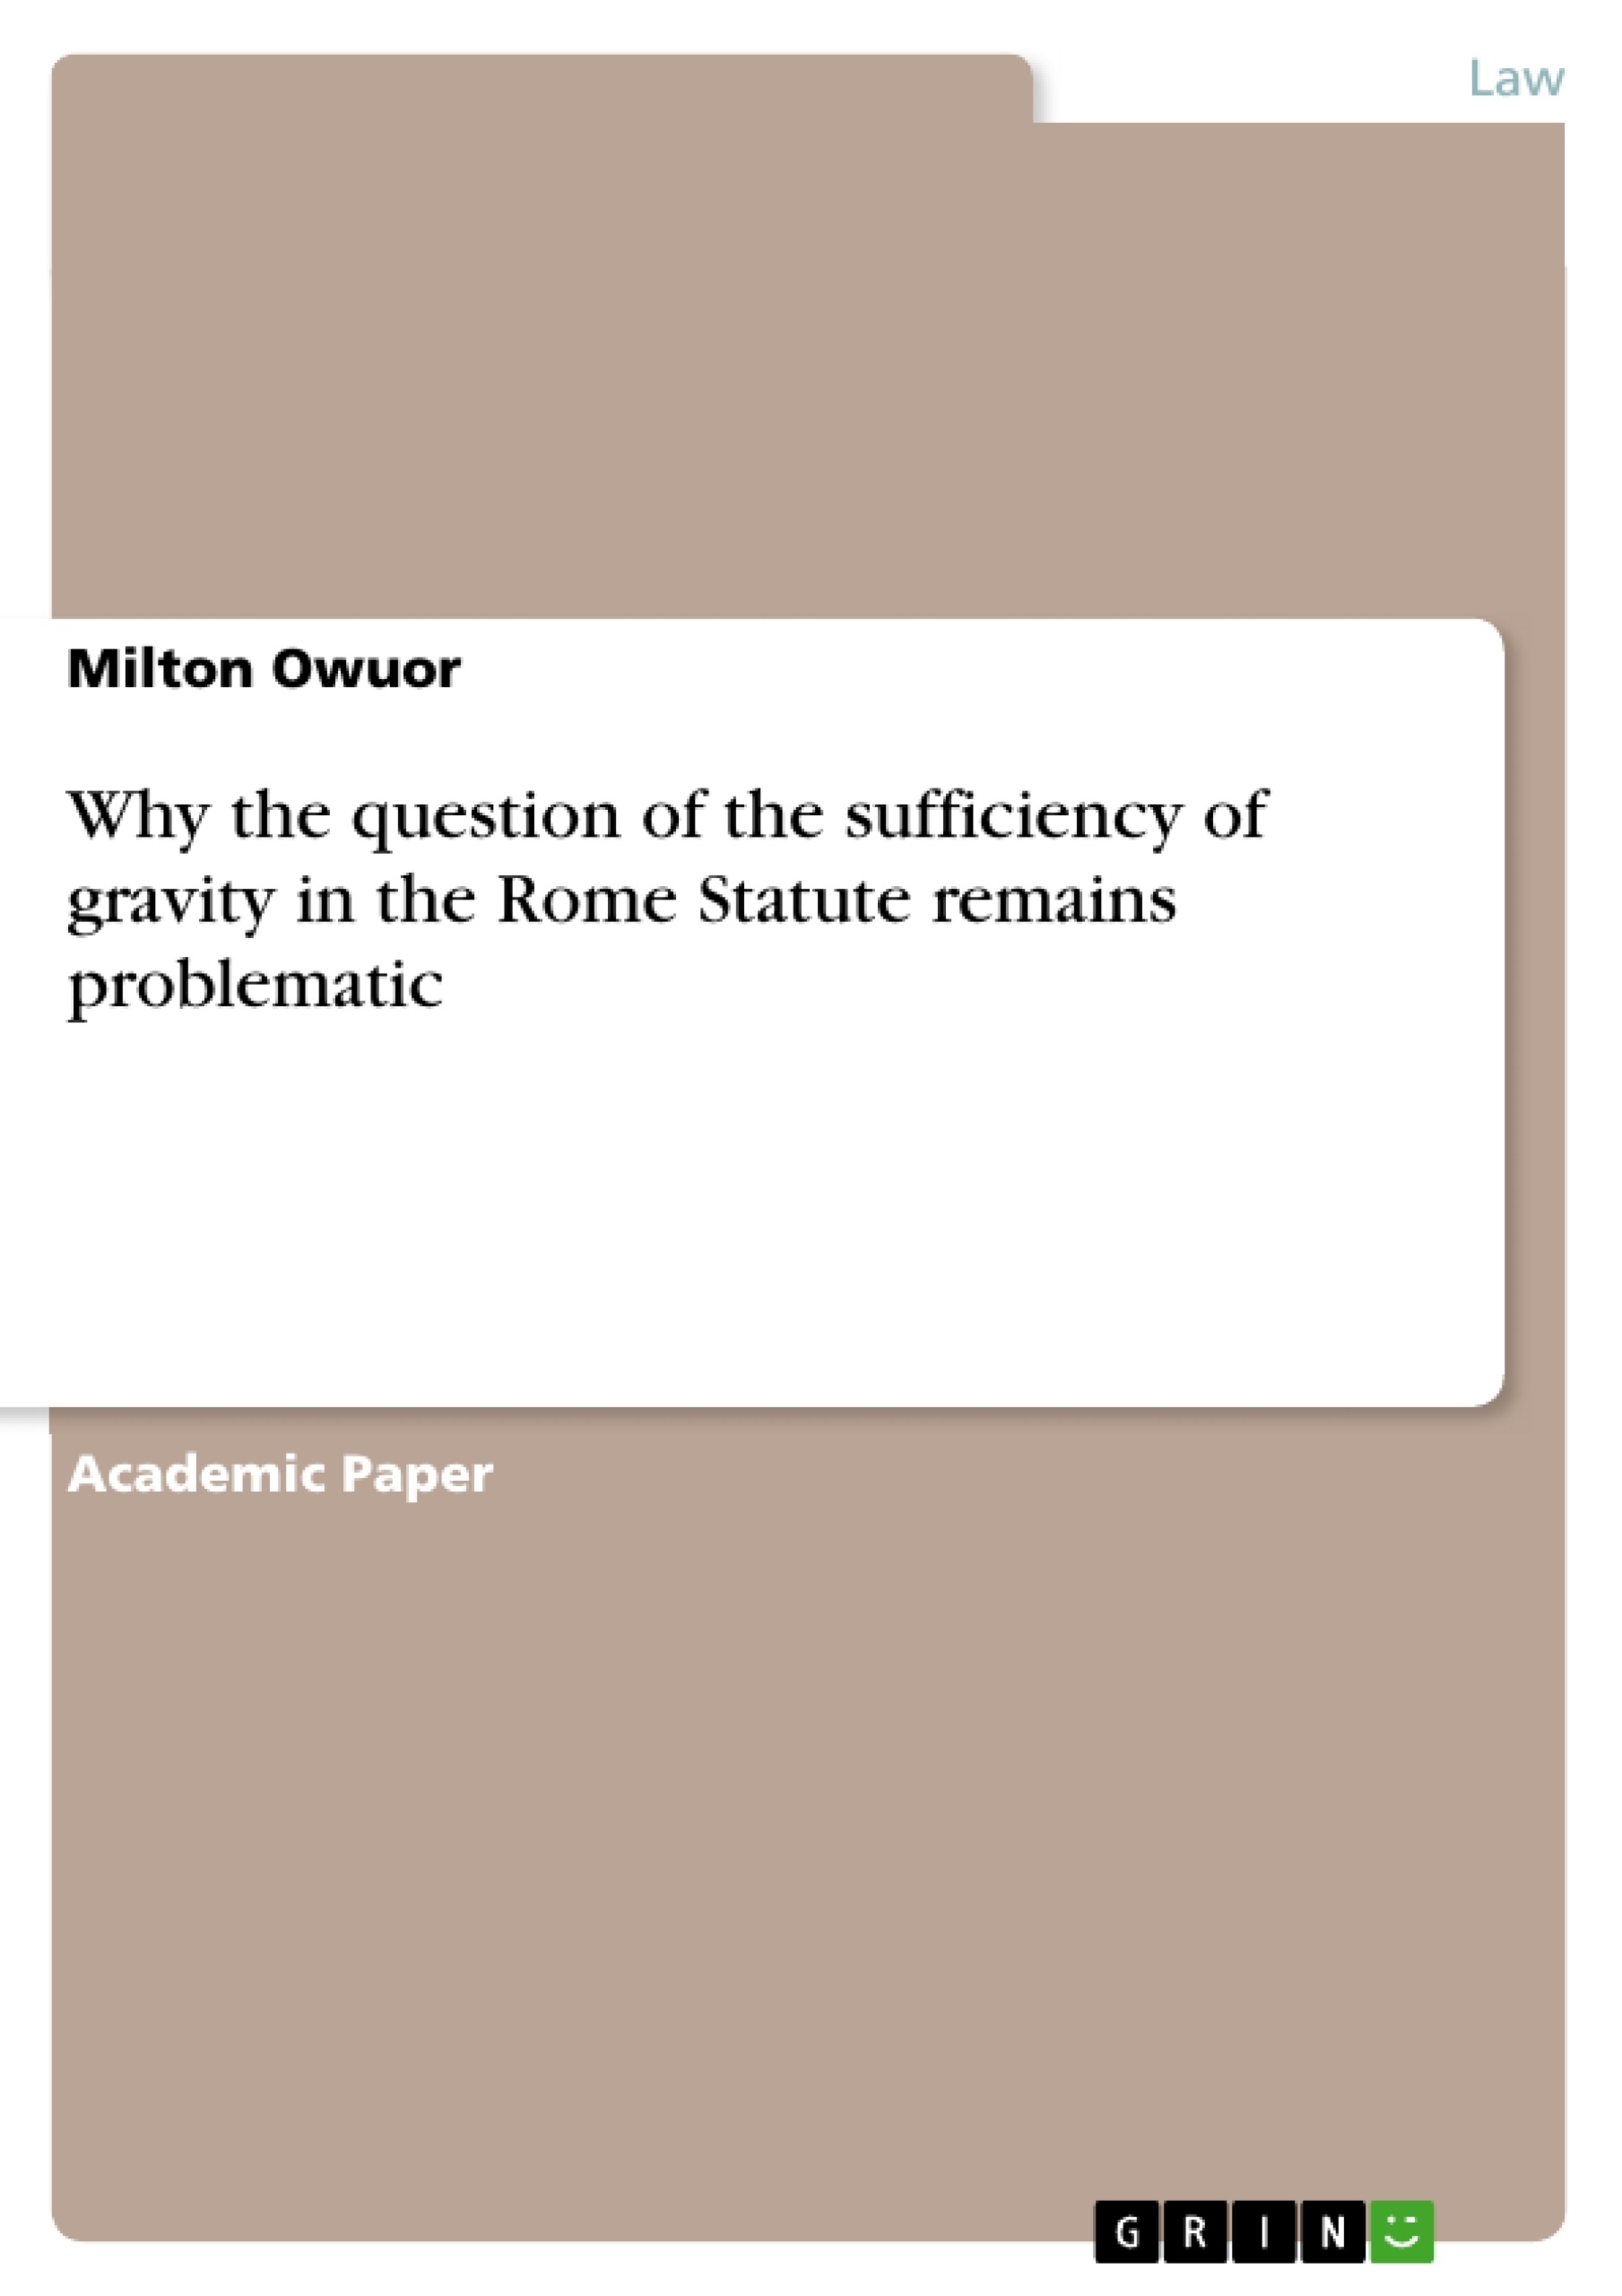 Título: Why the question of the sufficiency of gravity in the Rome Statute remains problematic